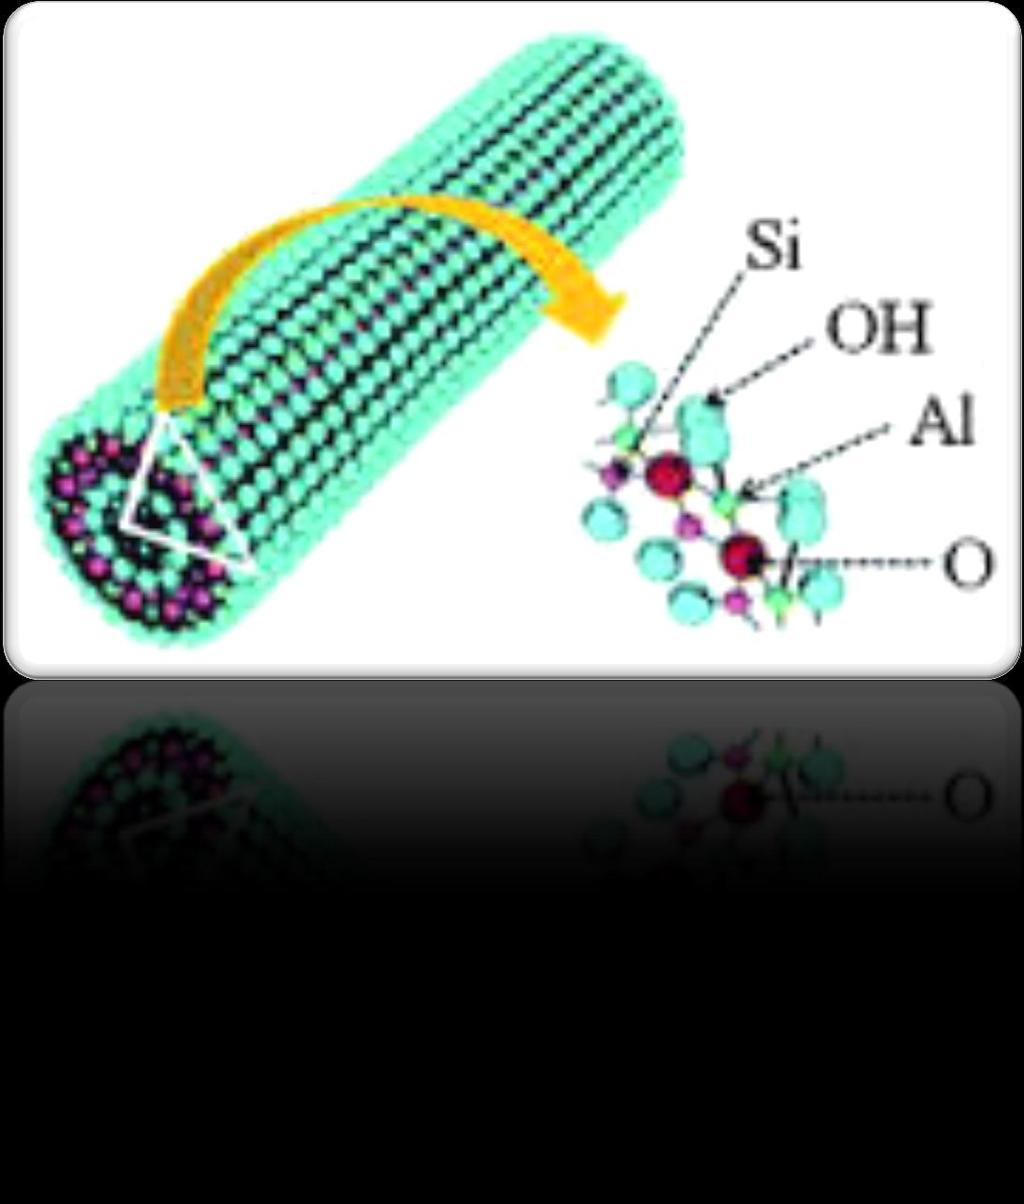 Tubular structure Good biocompatibility and very low cytotoxicity Two-layered aluminosilicate Outer